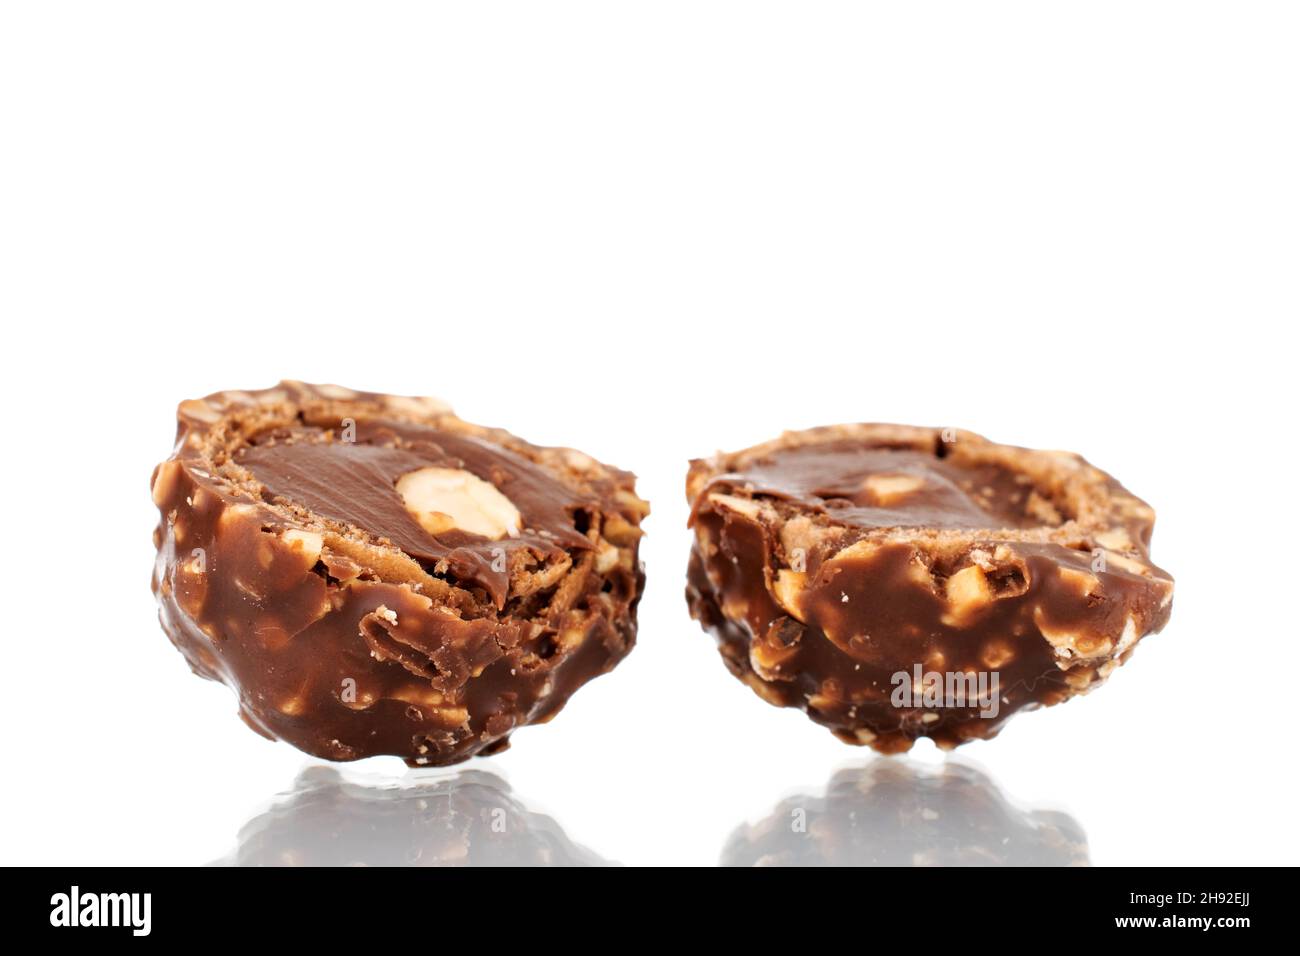 Two halves of chocolate candy with nuts, close-up, isolated on white. Stock Photo